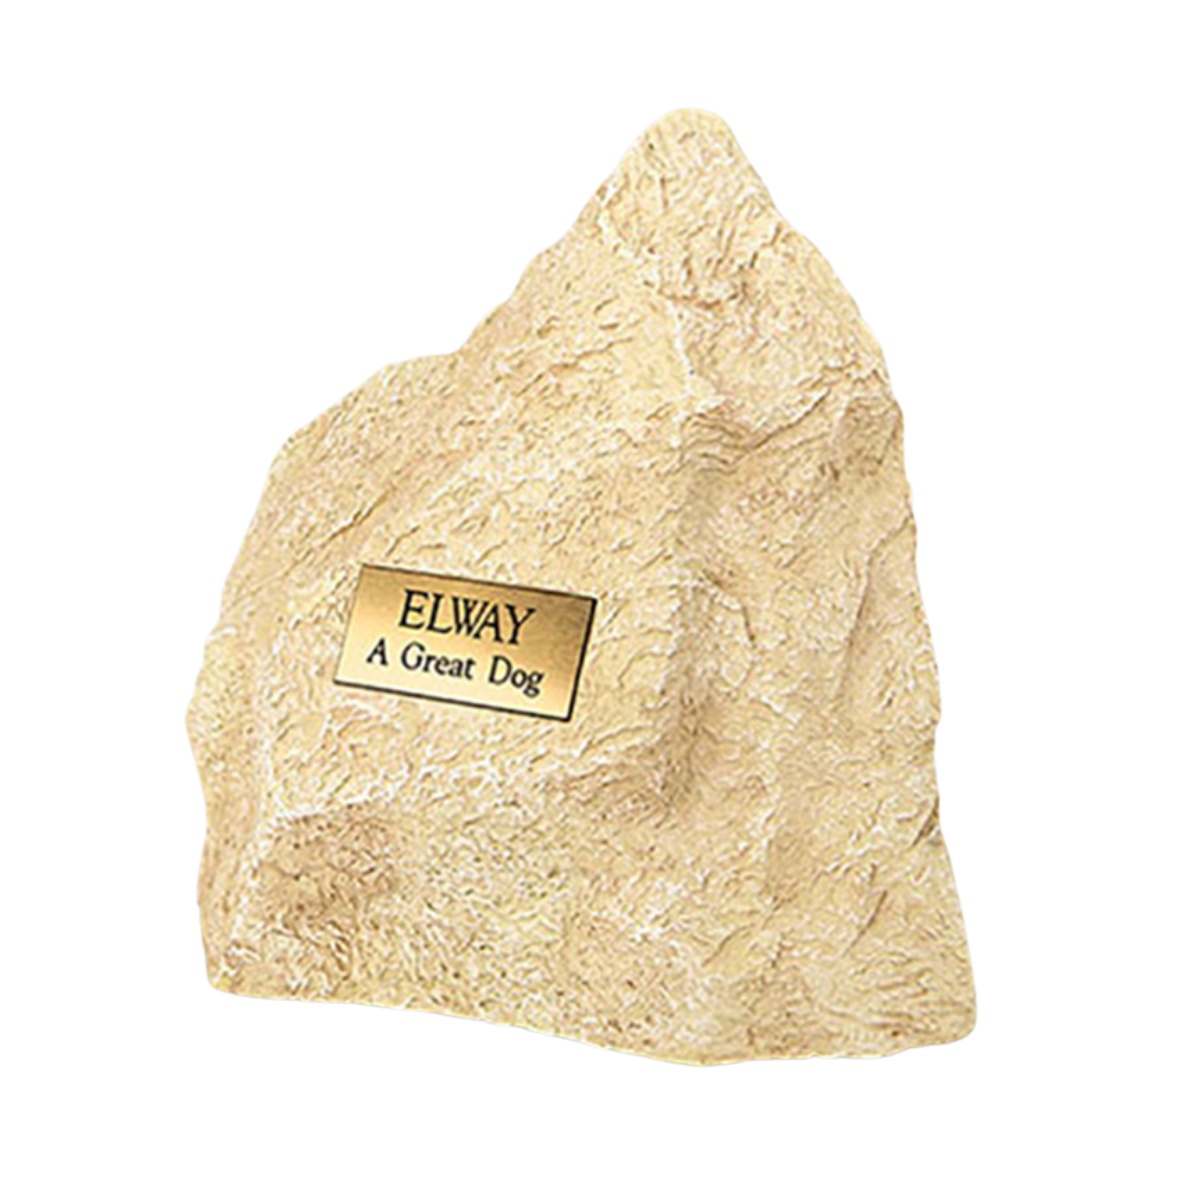 Limestone Faux Rock Urn - available in medium and large